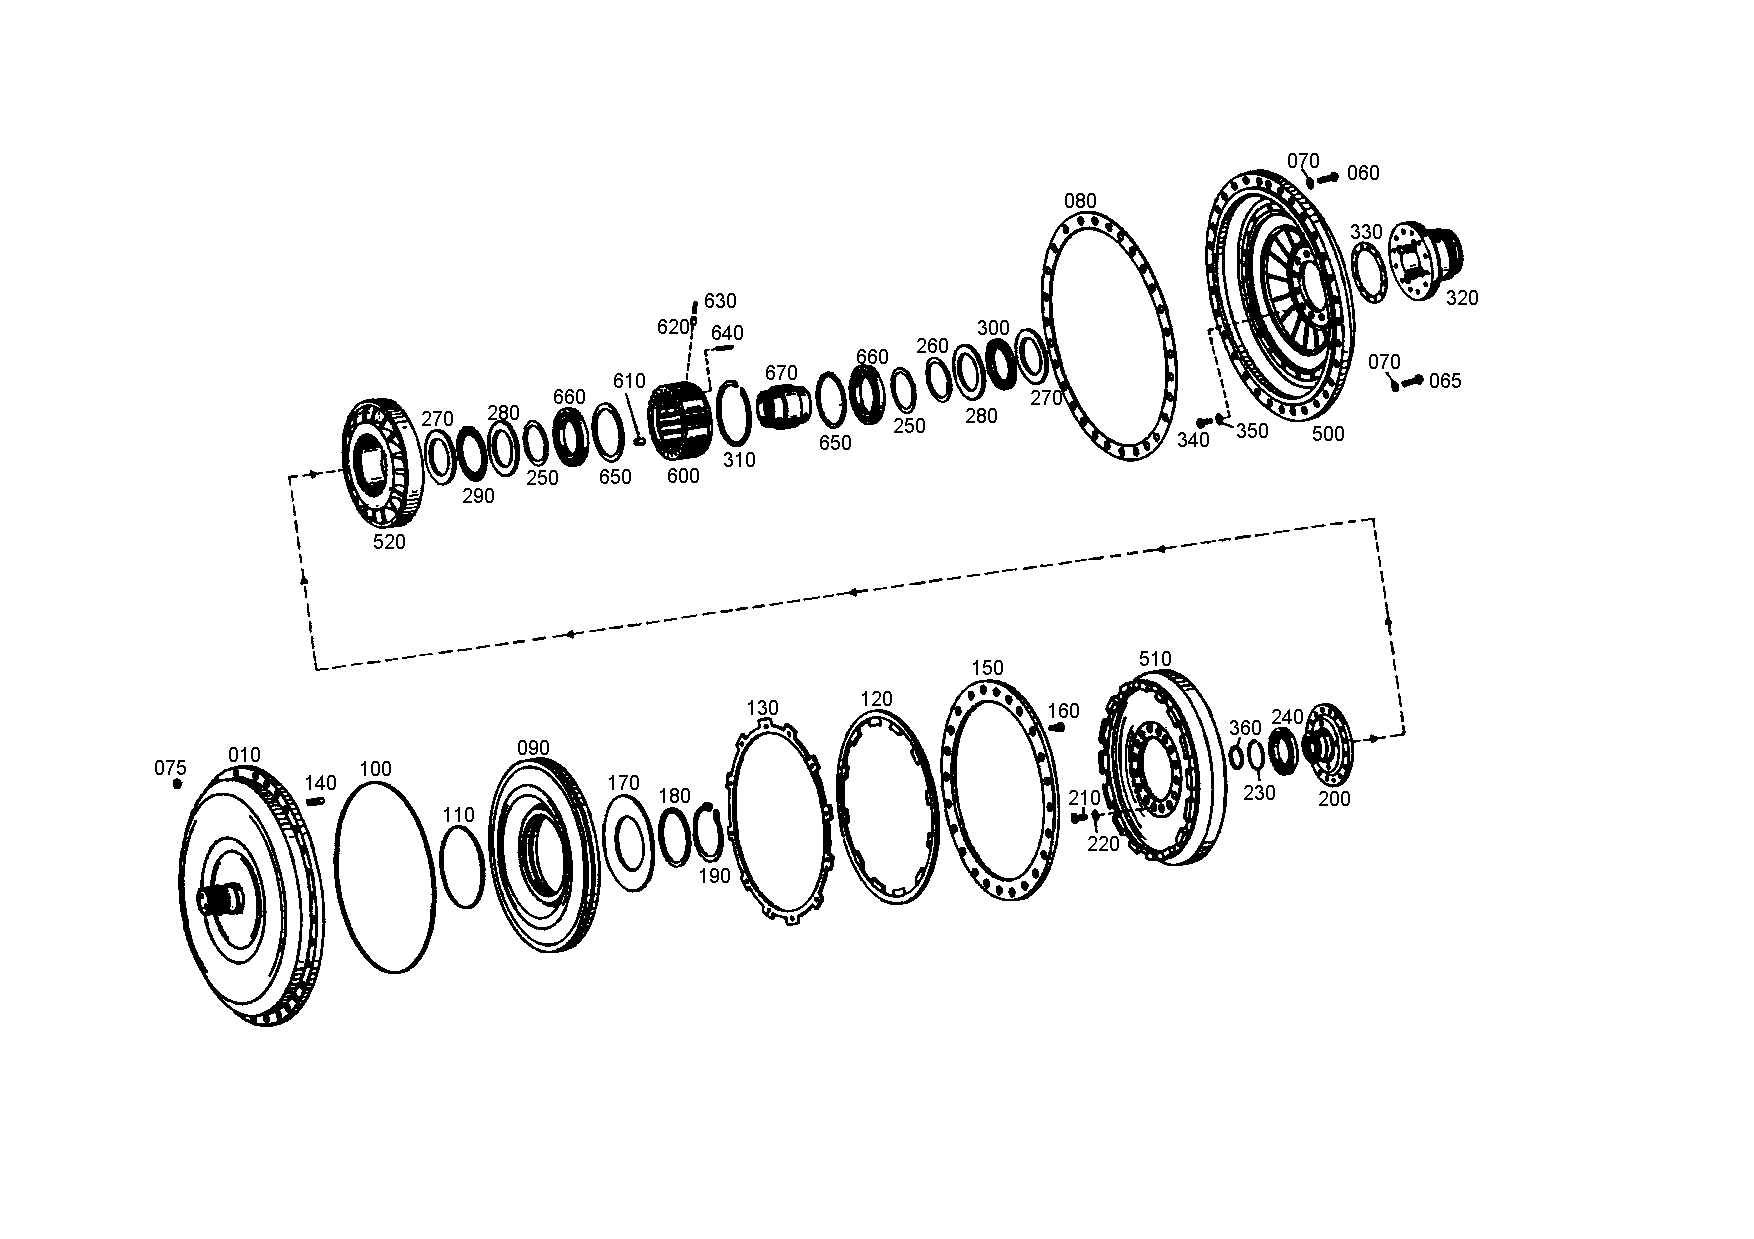 drawing for NOELL GMBH 141802119 - PLATE PISTON (figure 3)